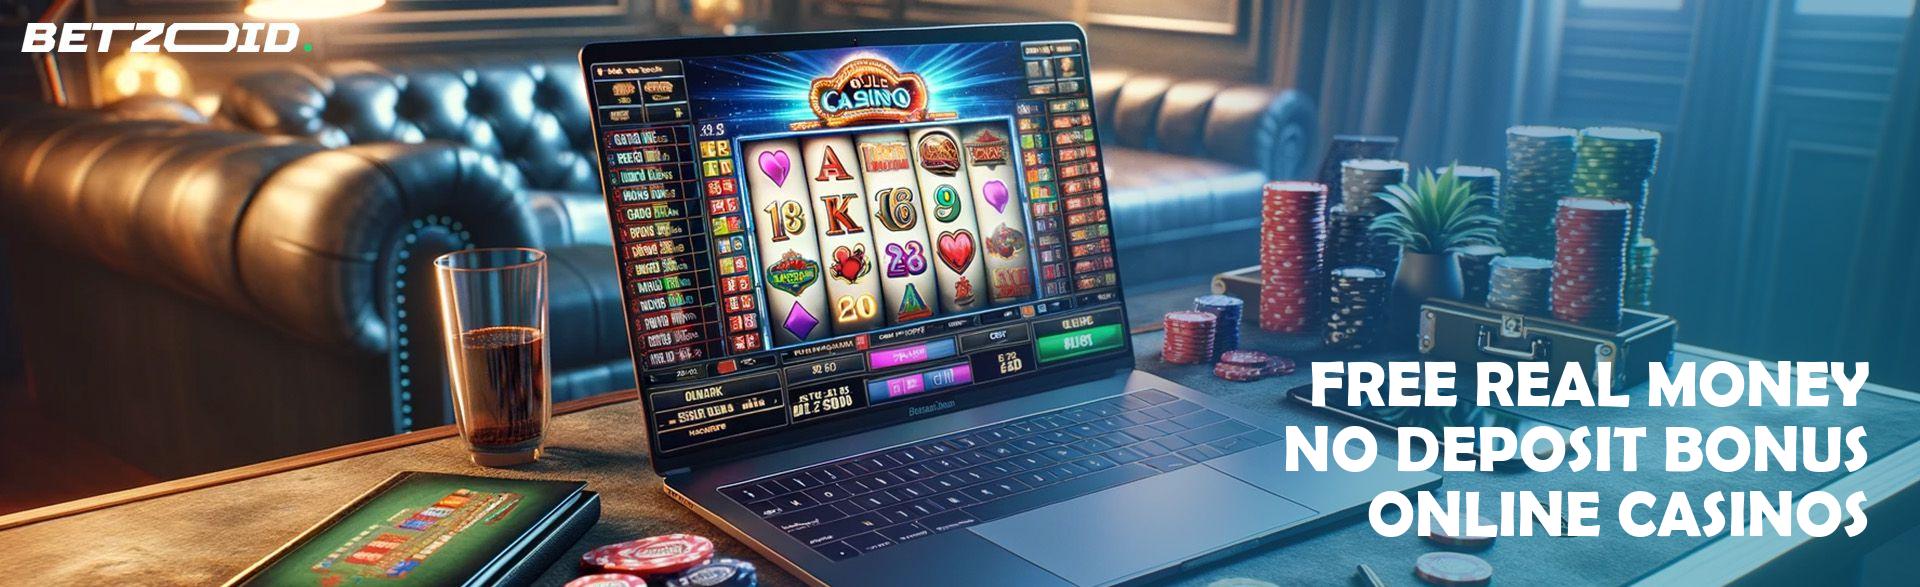 10 Undeniable Facts About Advantages of Online Casino Gaming for Malaysia Players: Exploring Benefits